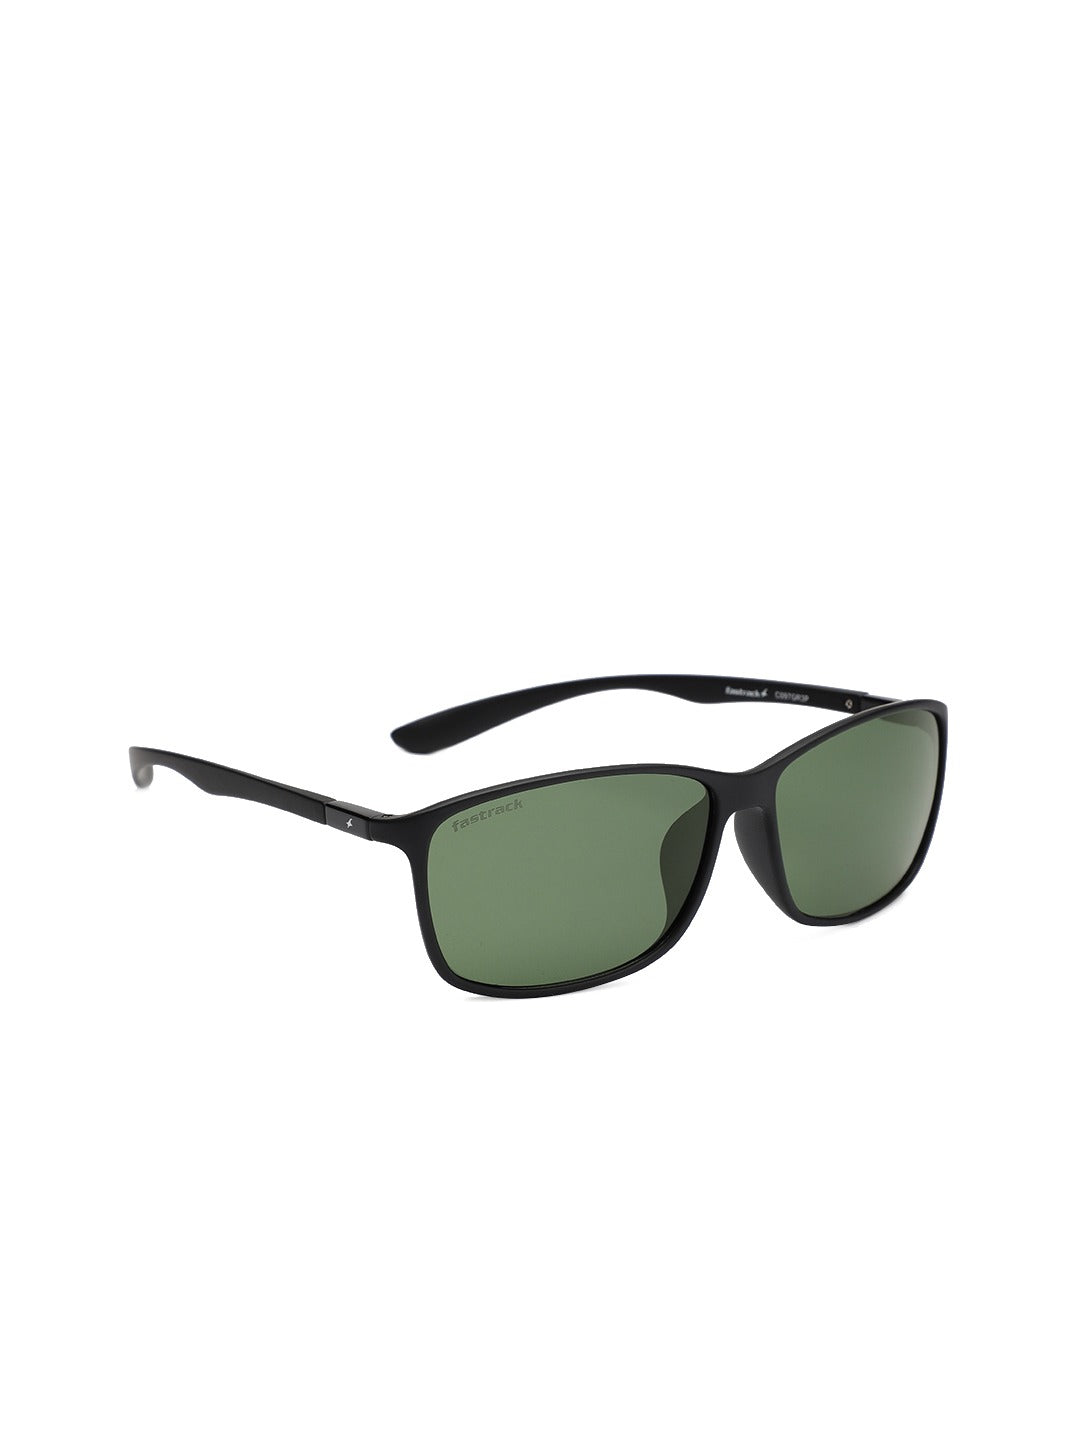 Fastrack Men Rectangle Sunglasses at Best Price - Halabh